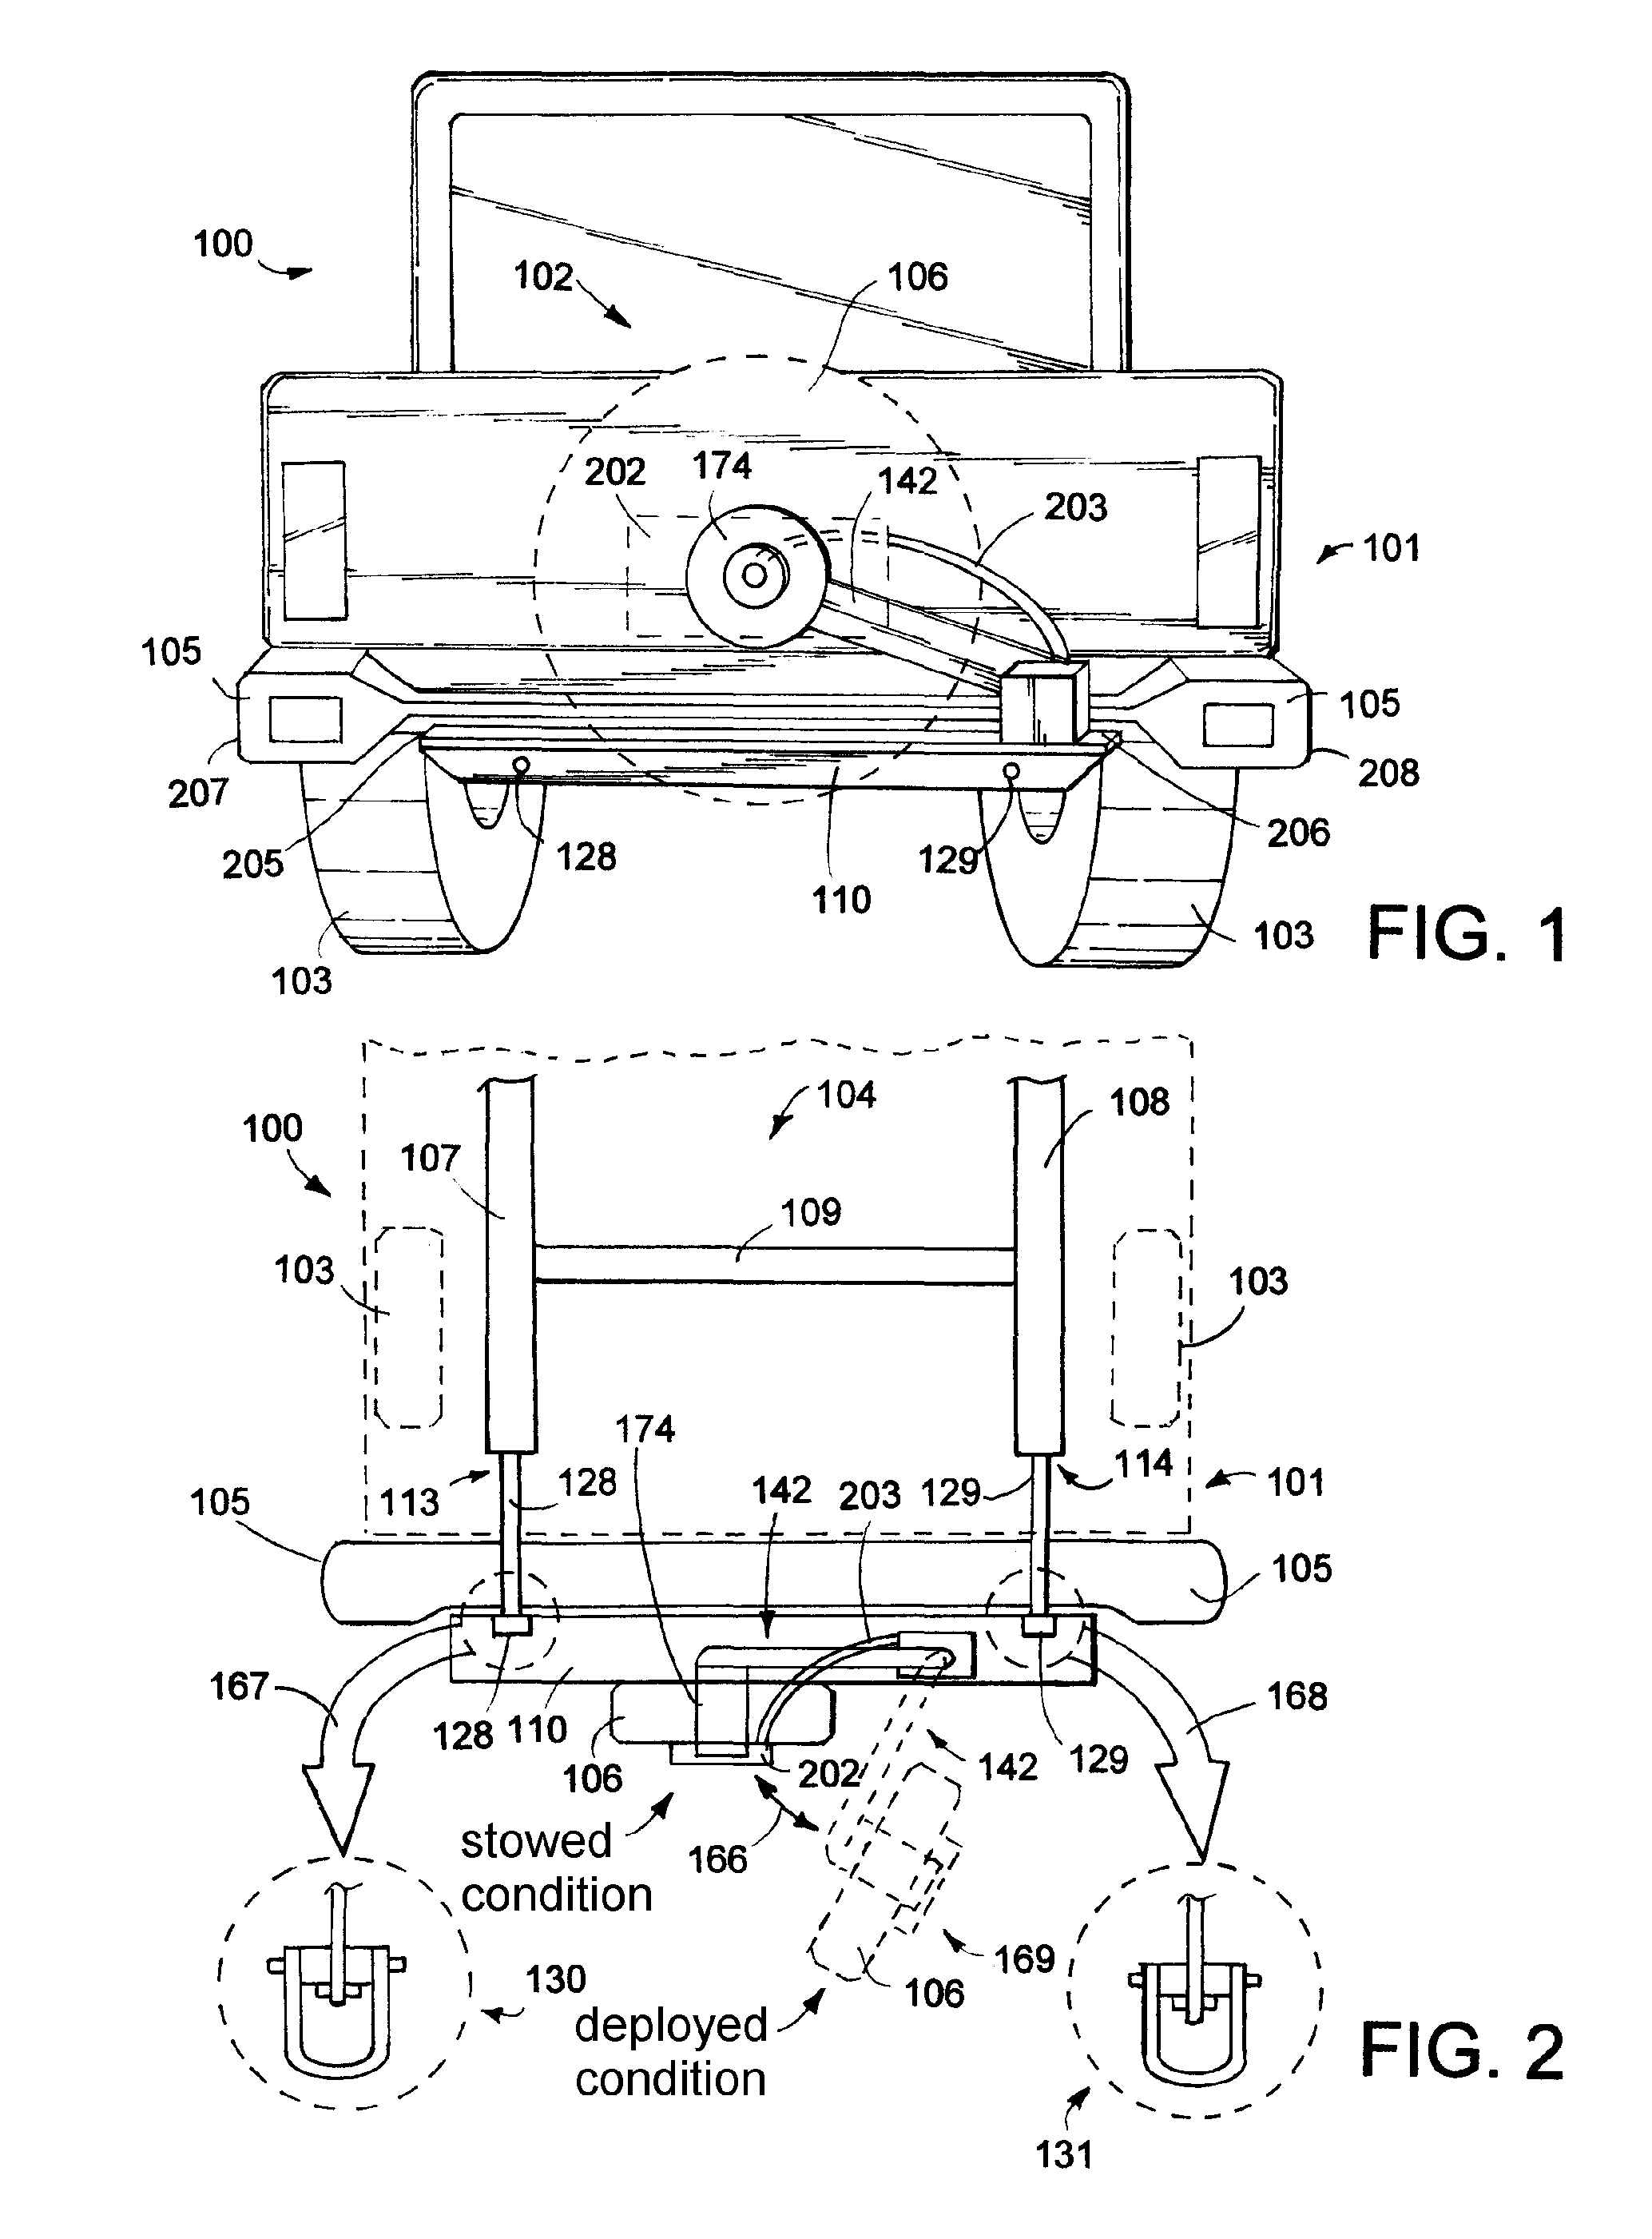 Support structure for a spare tire carrier assembly